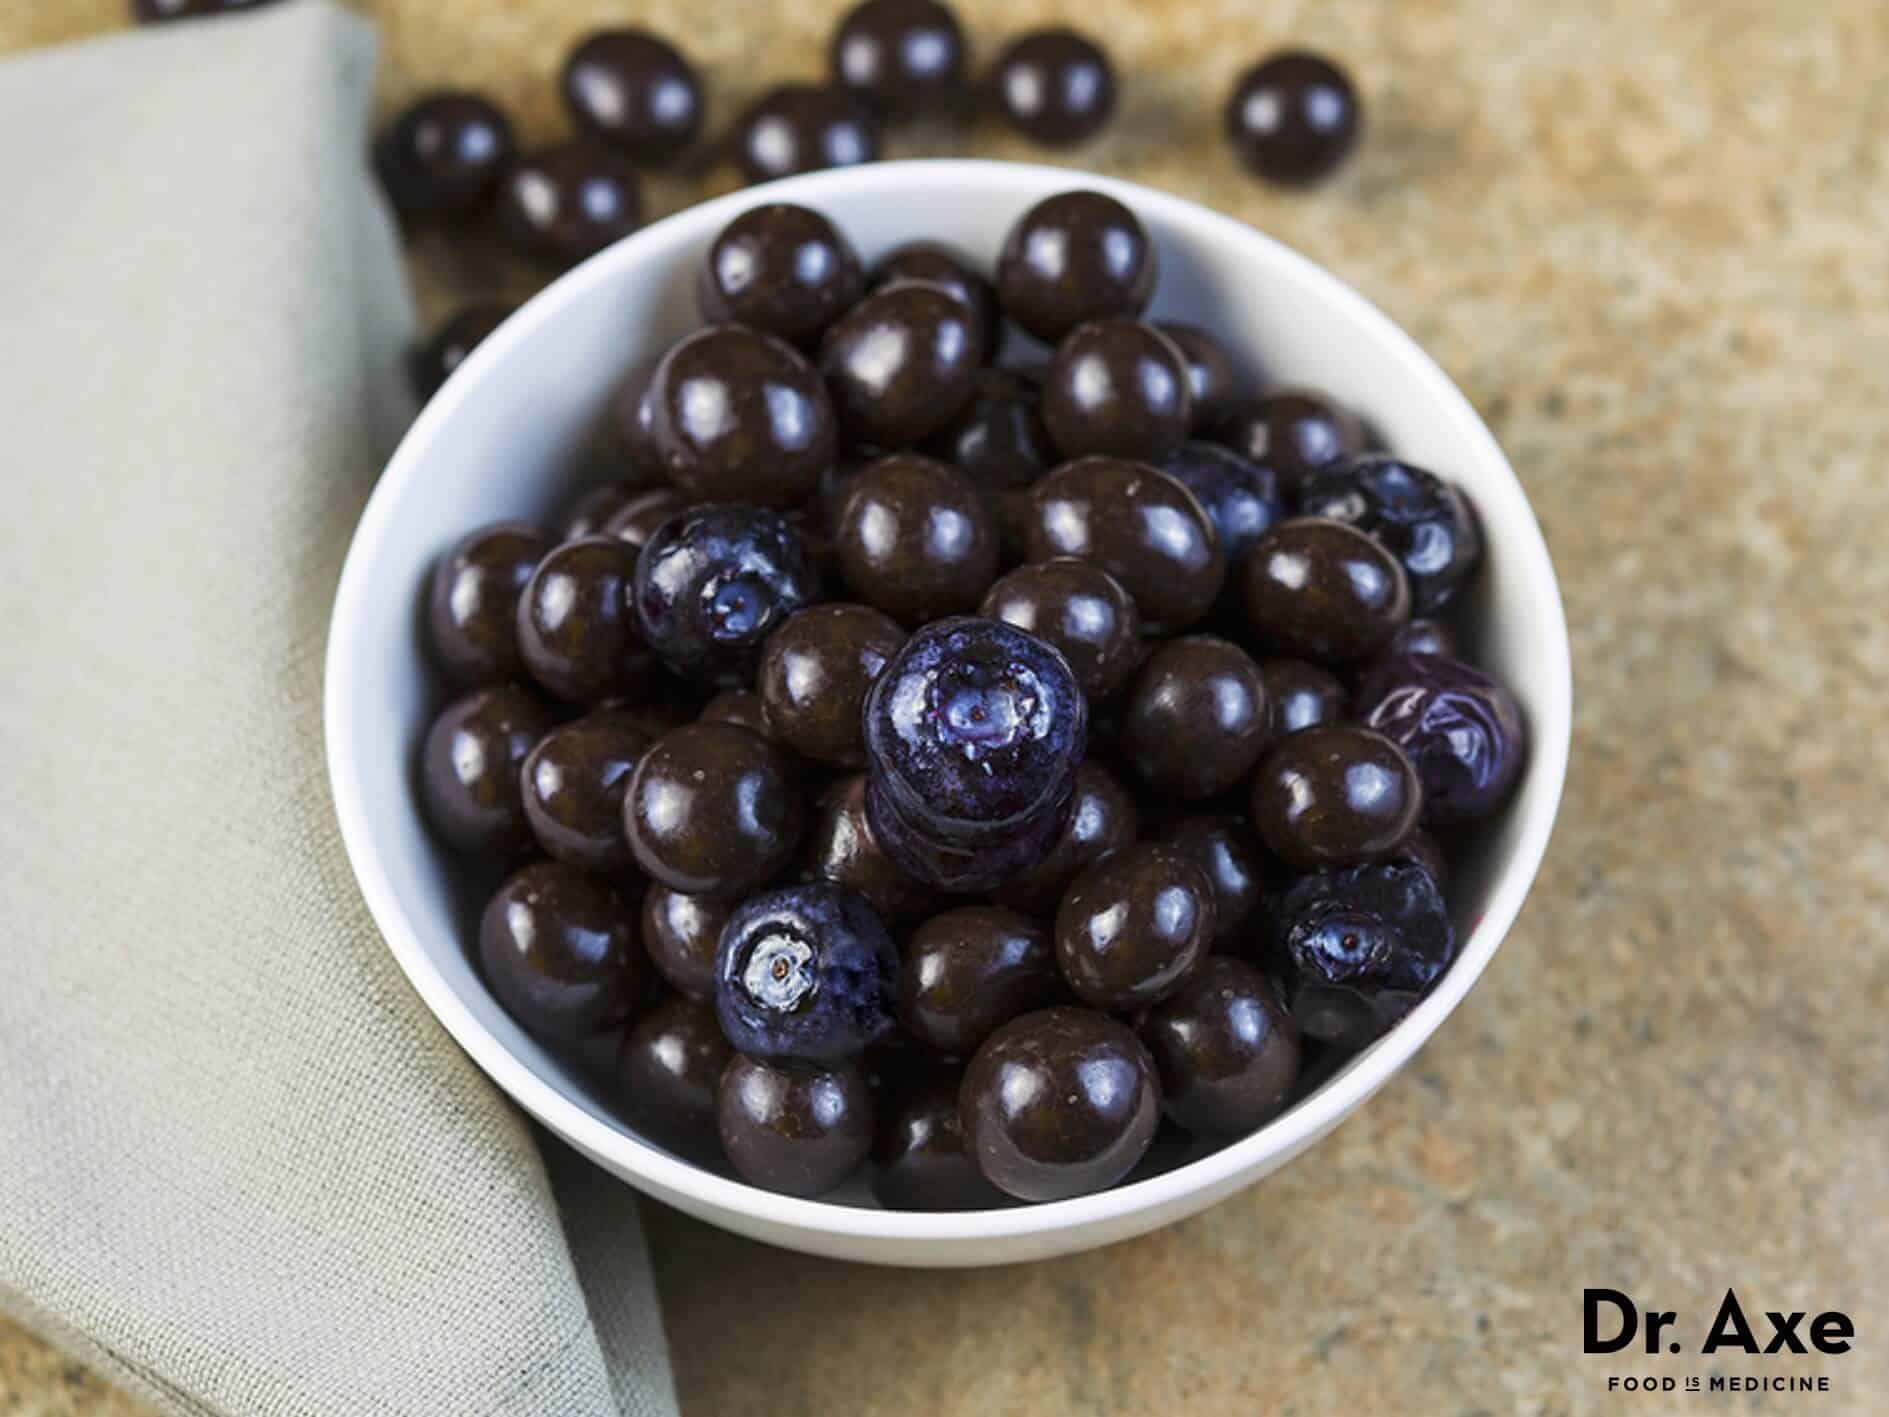 Chocolate covered berries recipe - Dr. Axe